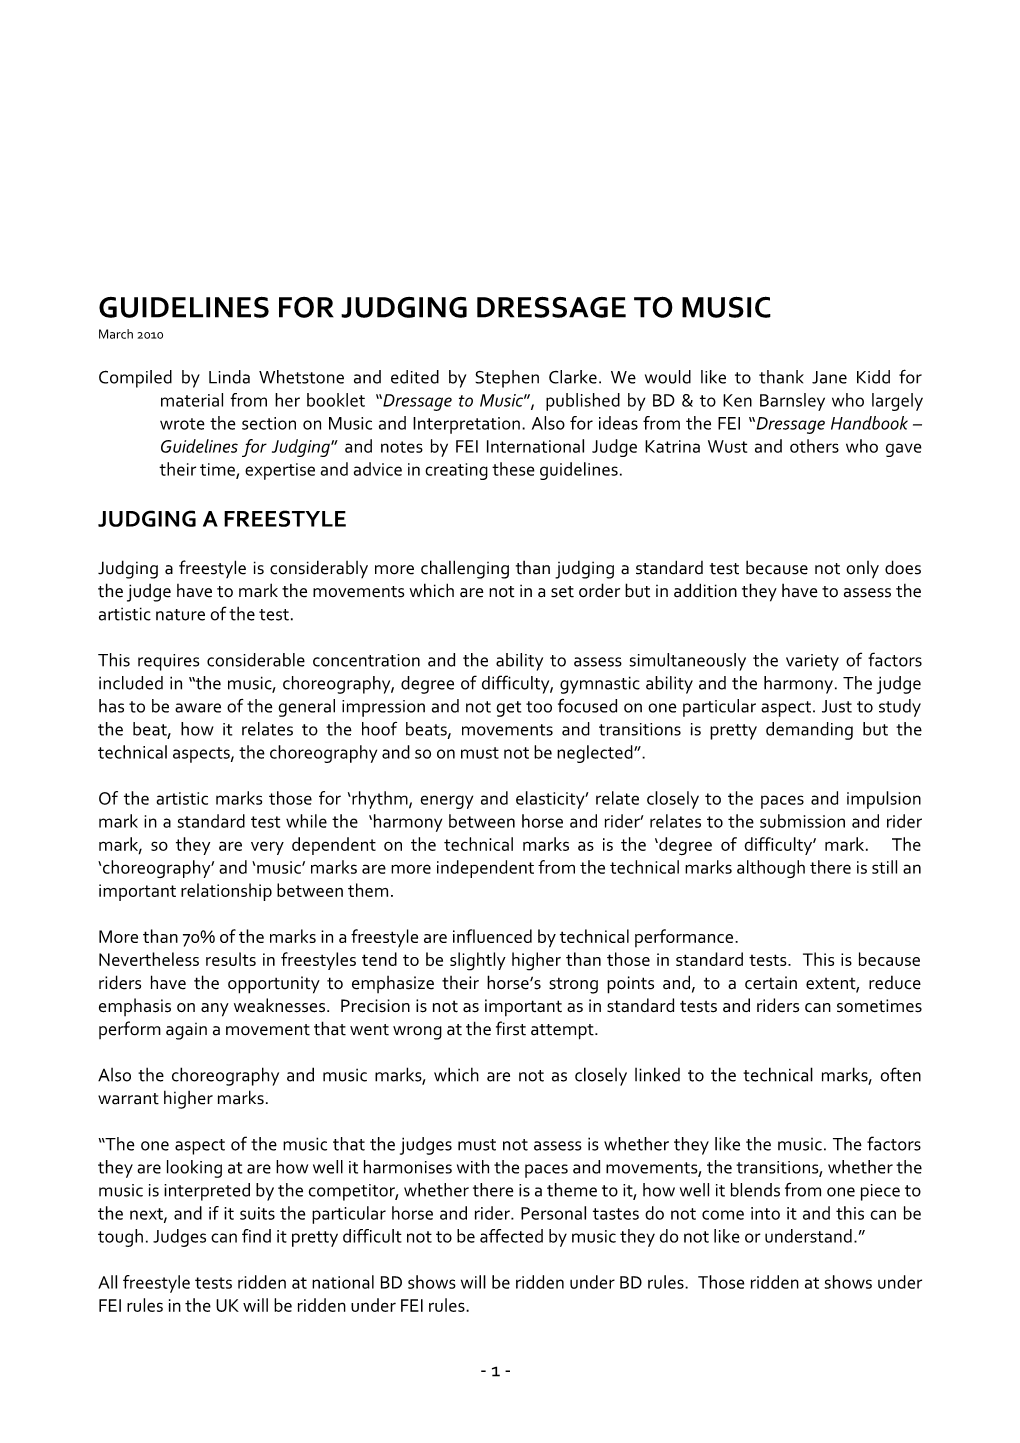 Guidelines for Judging Dressage to Music